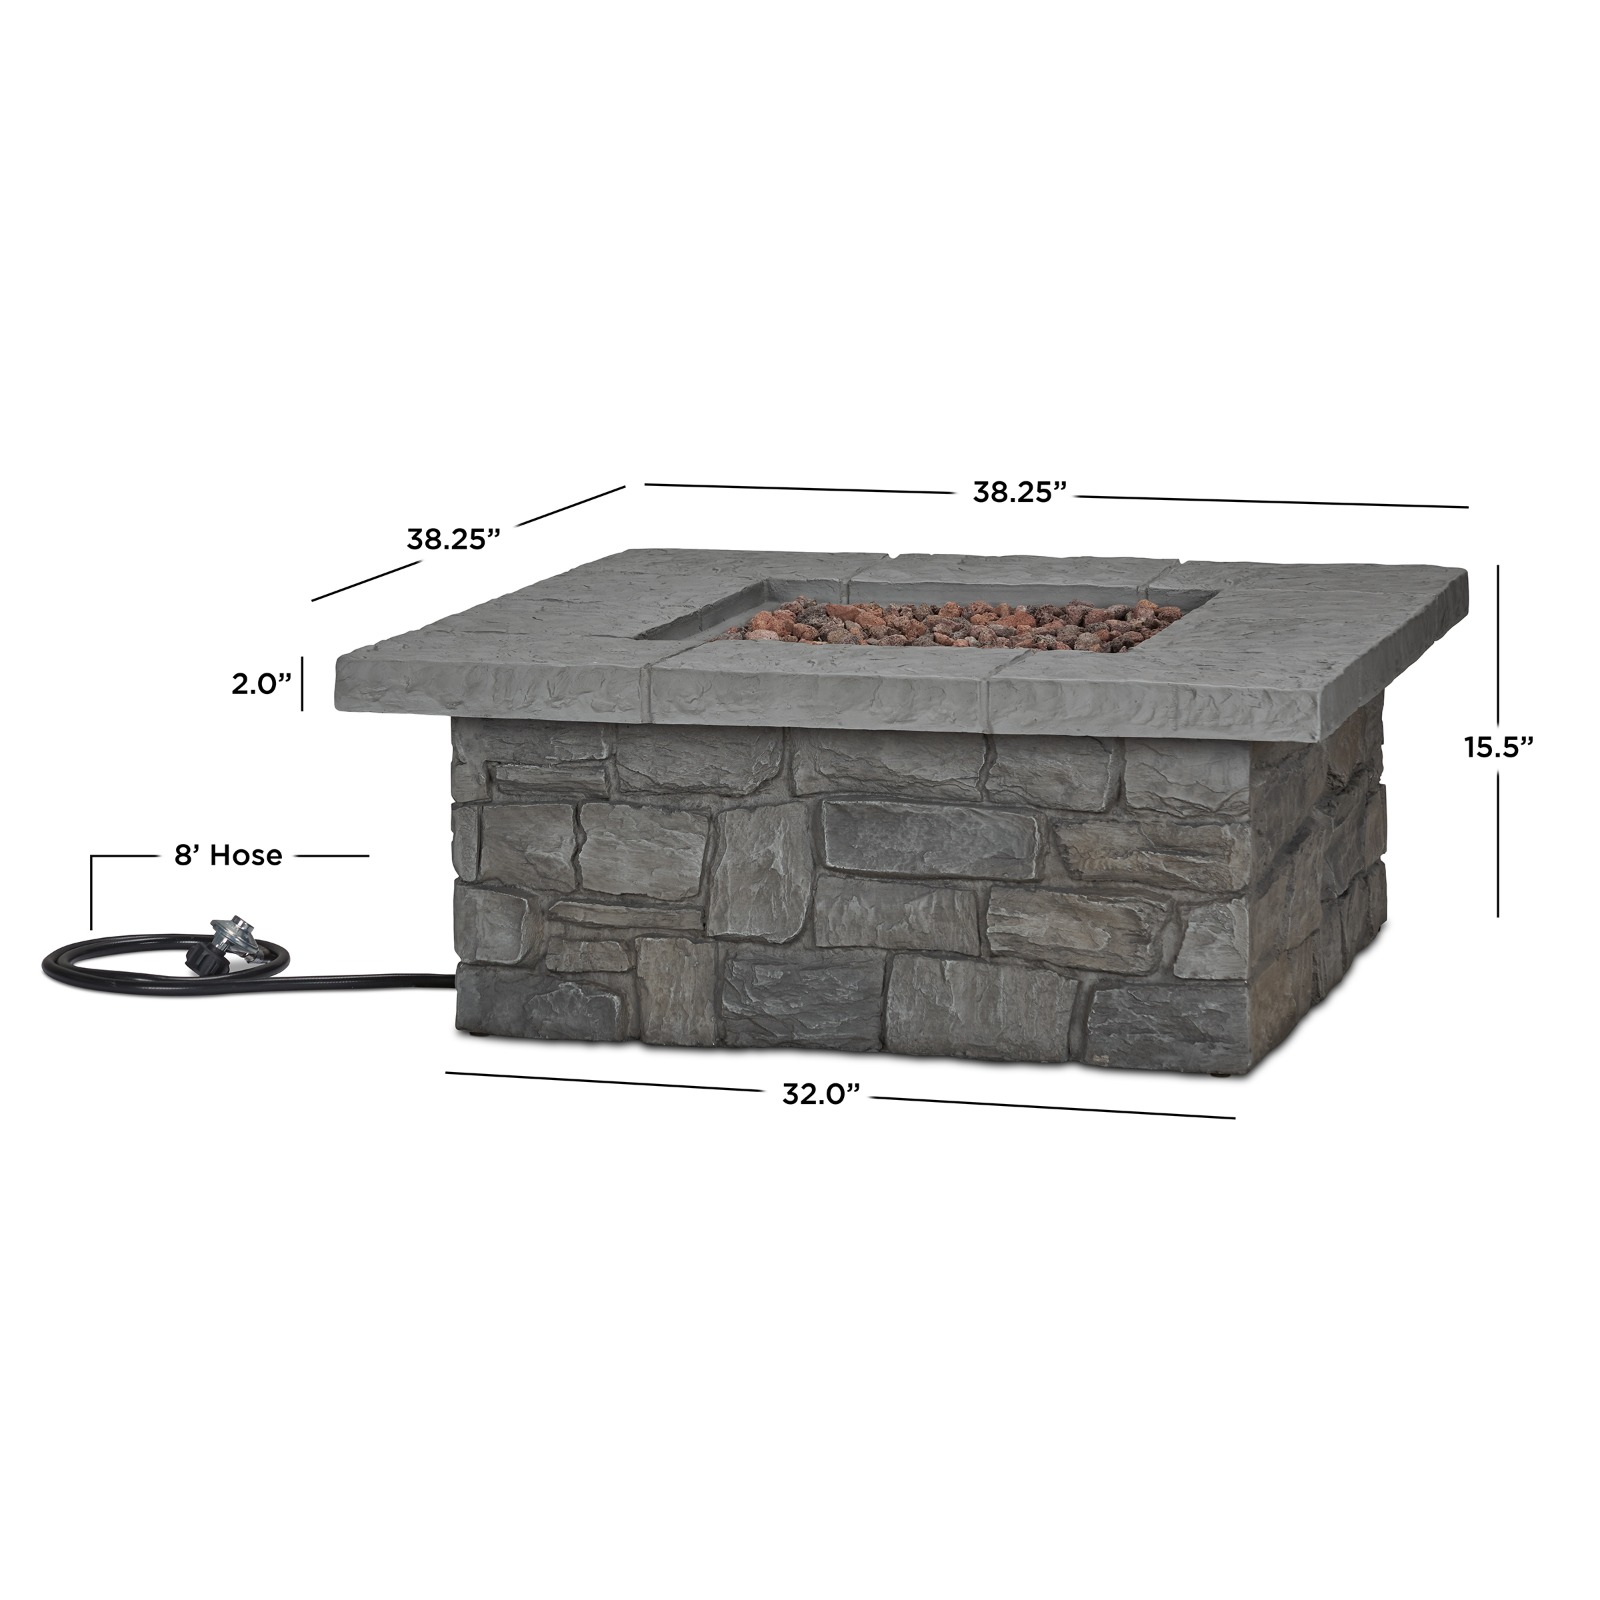 Sedona Square Propane Fire Table with NG Conversion Kit dimensions